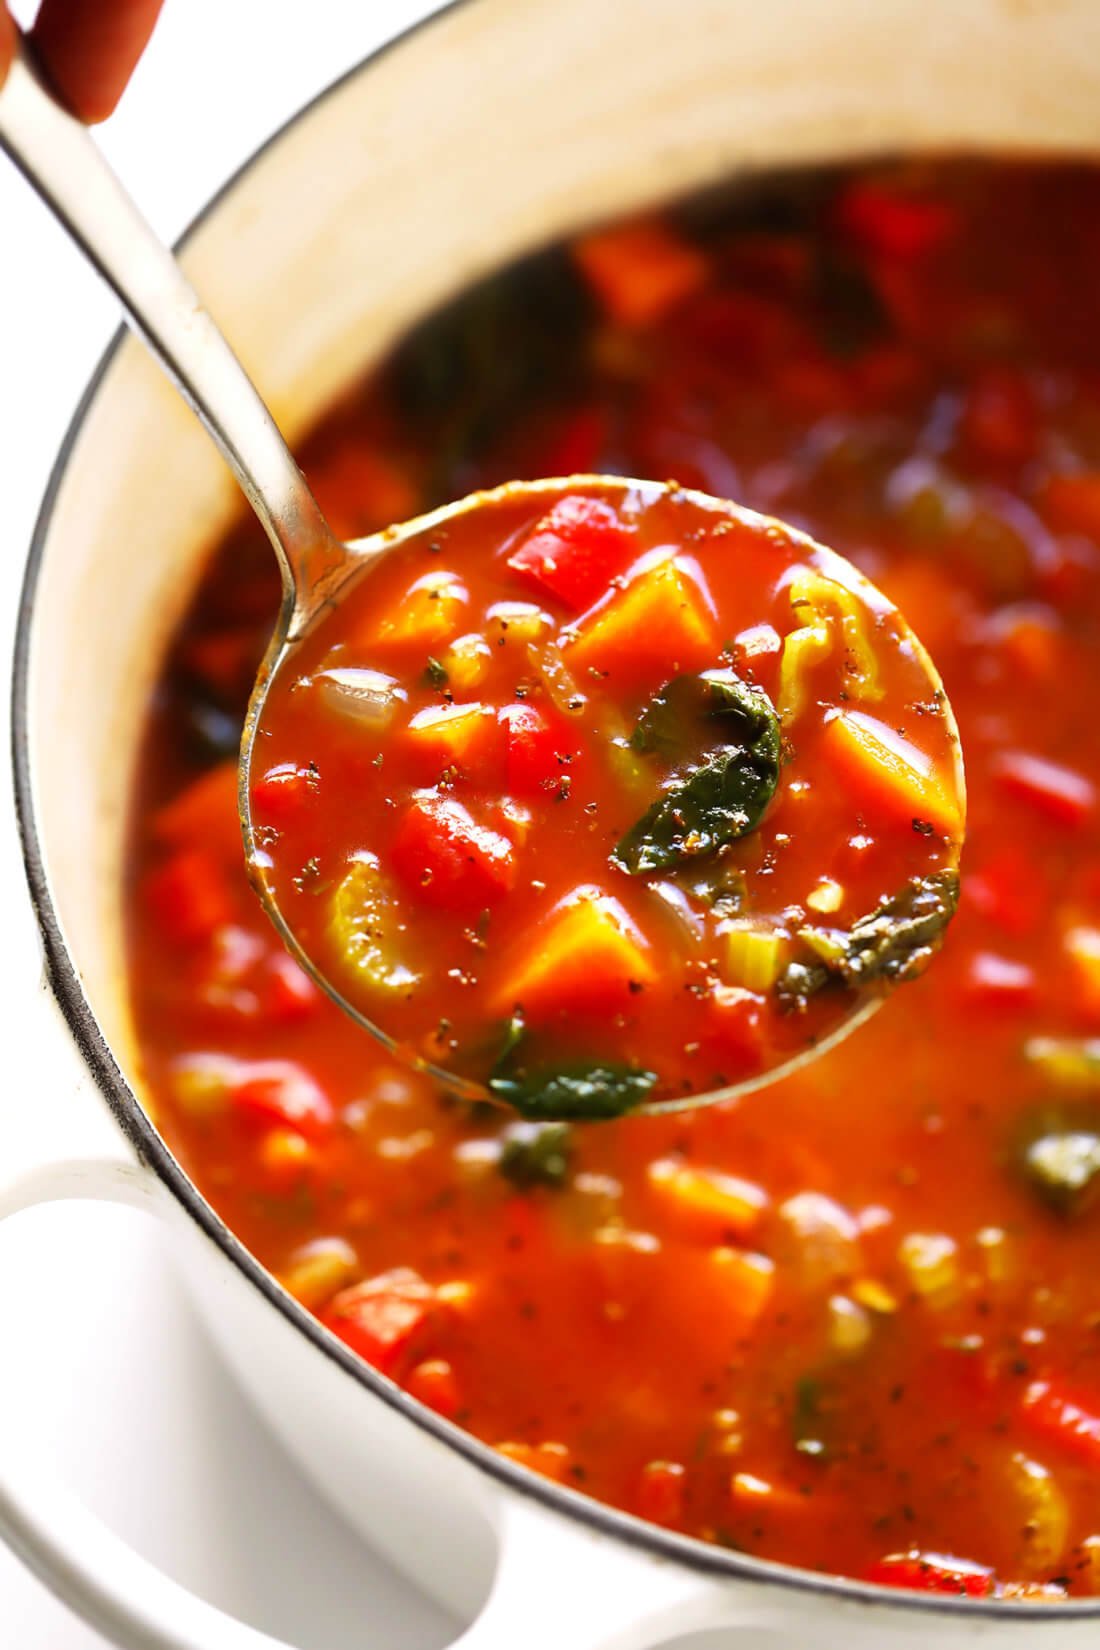 My Favorite Vegetable Soup Recipe | Gimme Some Oven